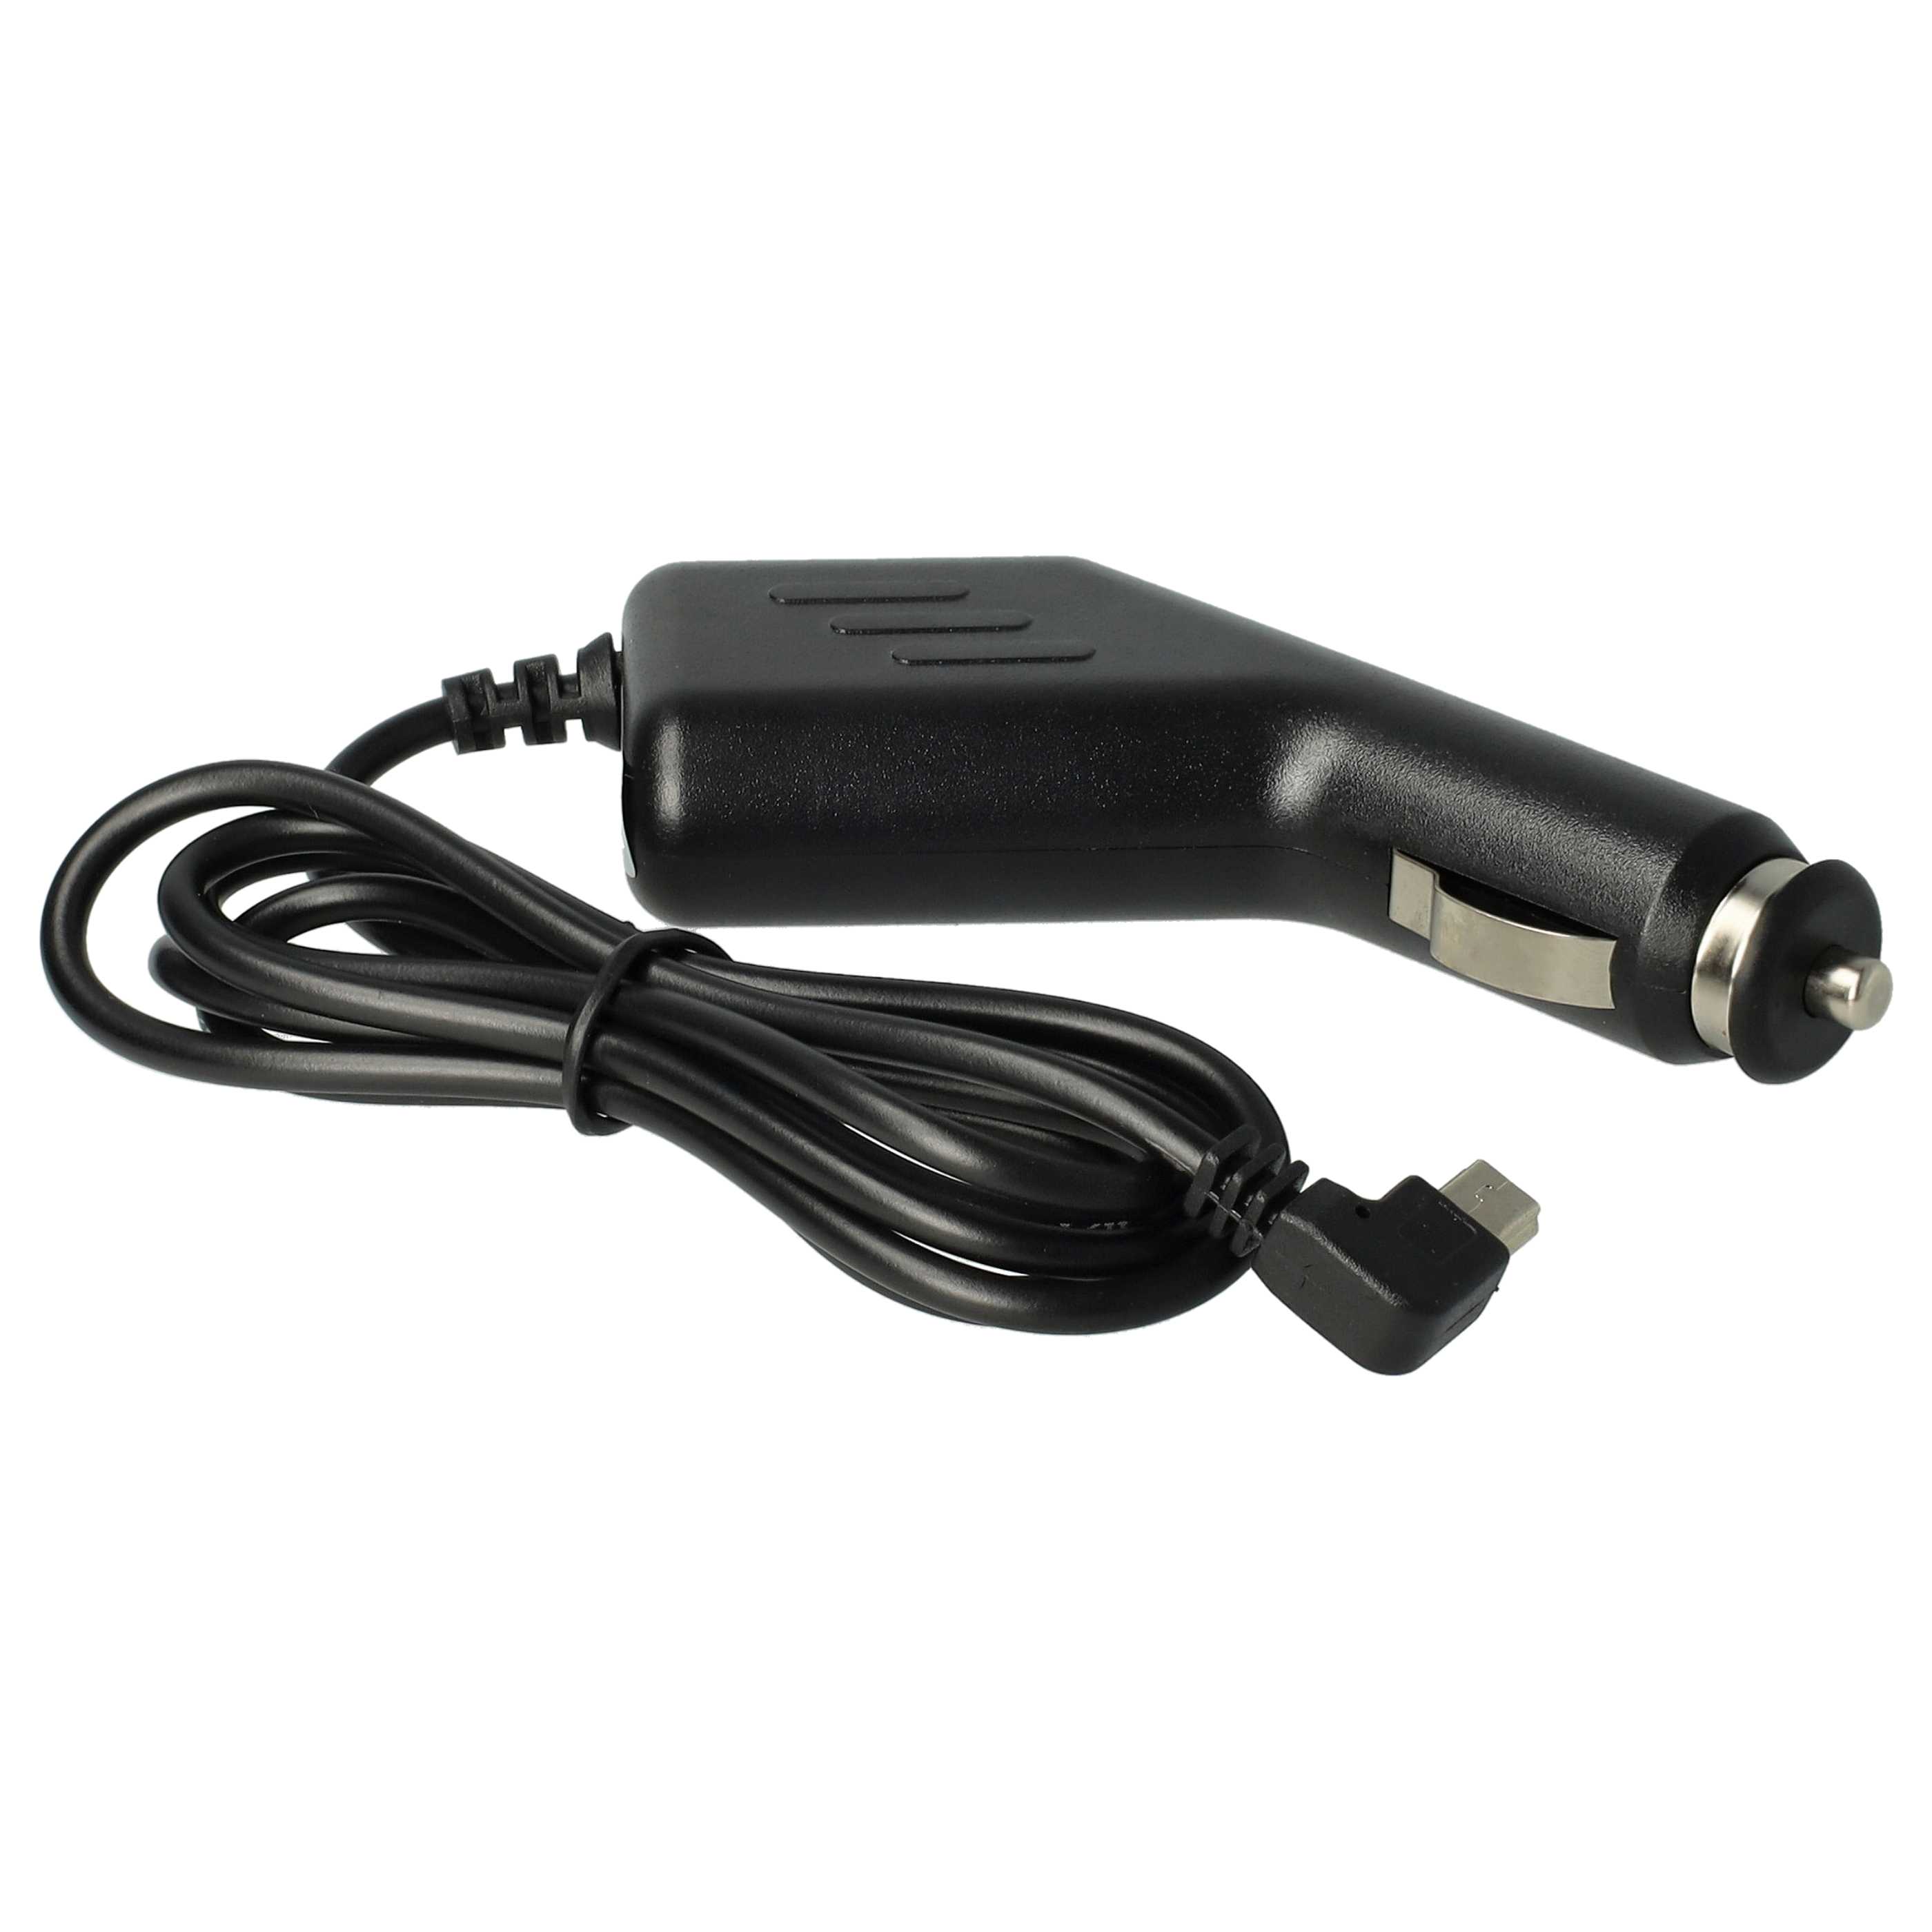 Mini-USB Car Charger Cable 1.0 A suitable forDevices like GPS, Sat Navs, 90° Plug